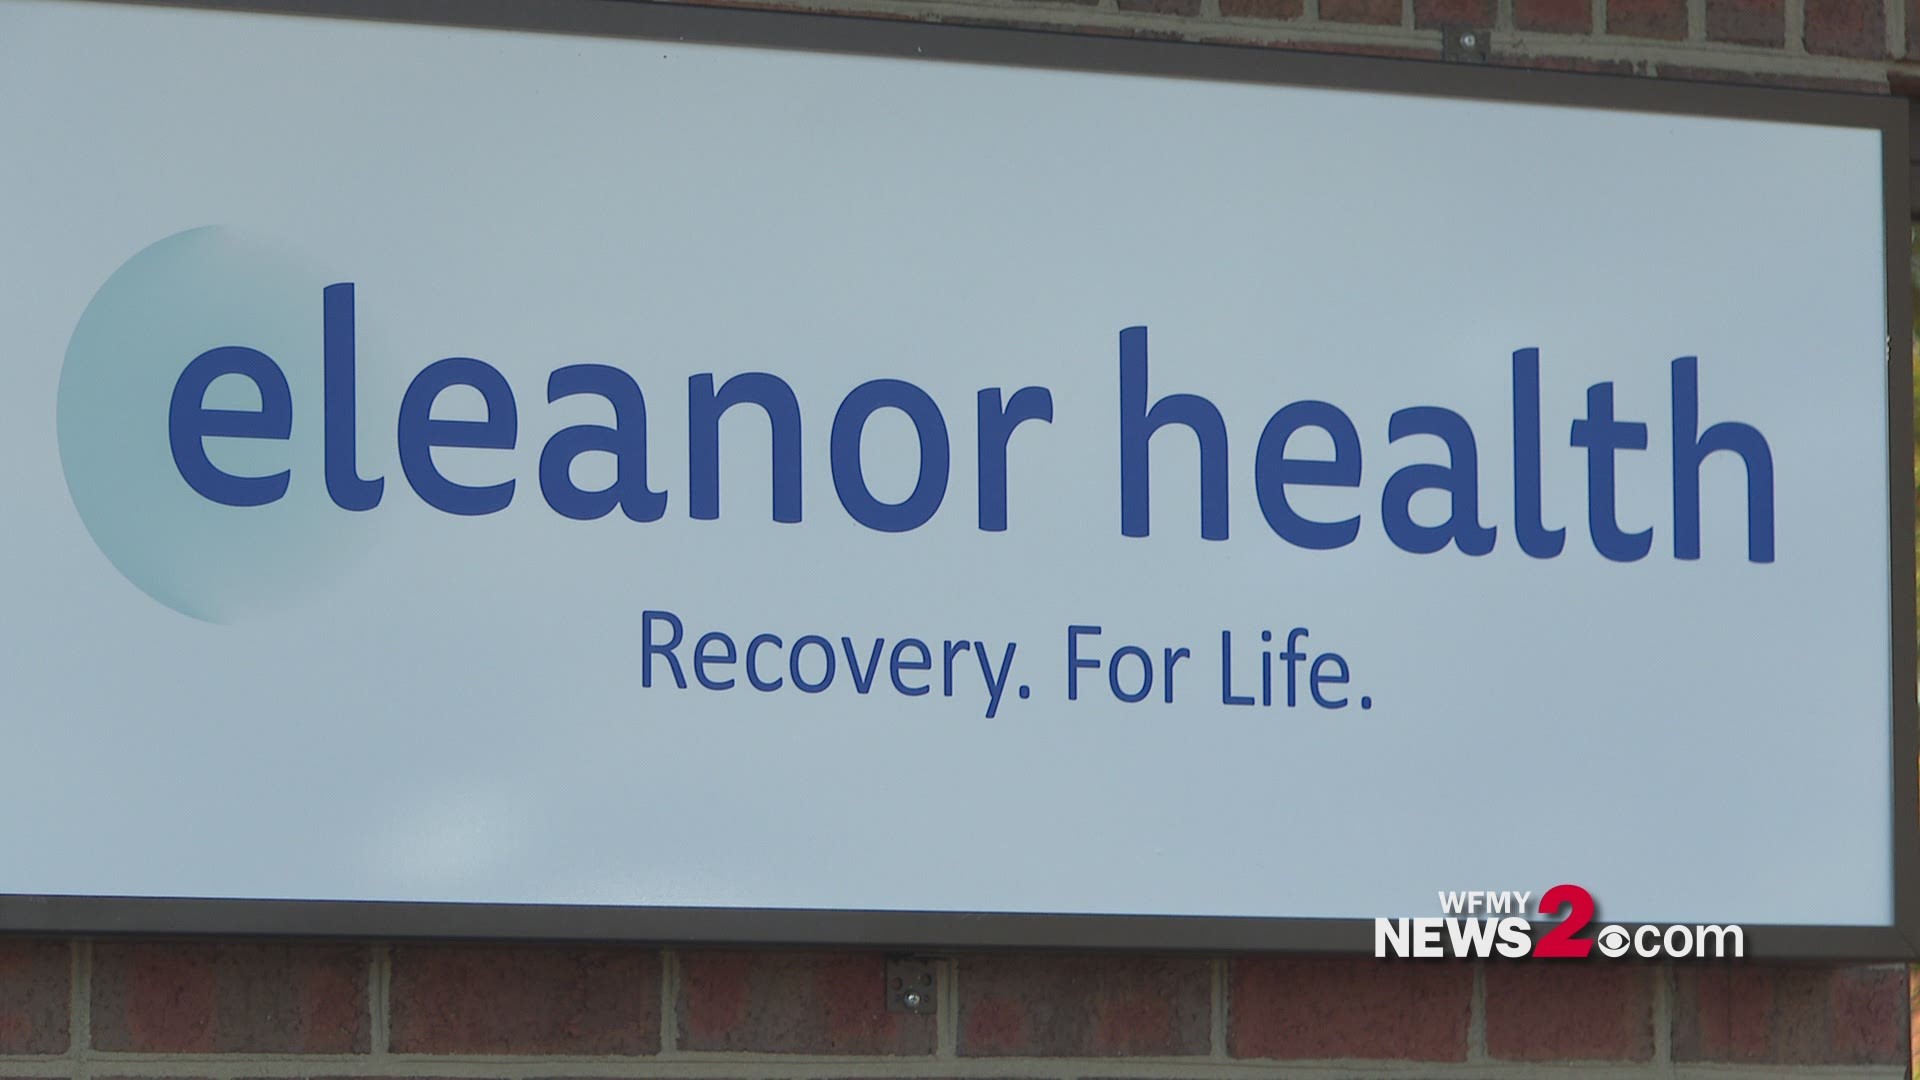 Eleanor Health, the group running the clinic, wants to change the conversation around addiction, and help those in the community who are struggling.